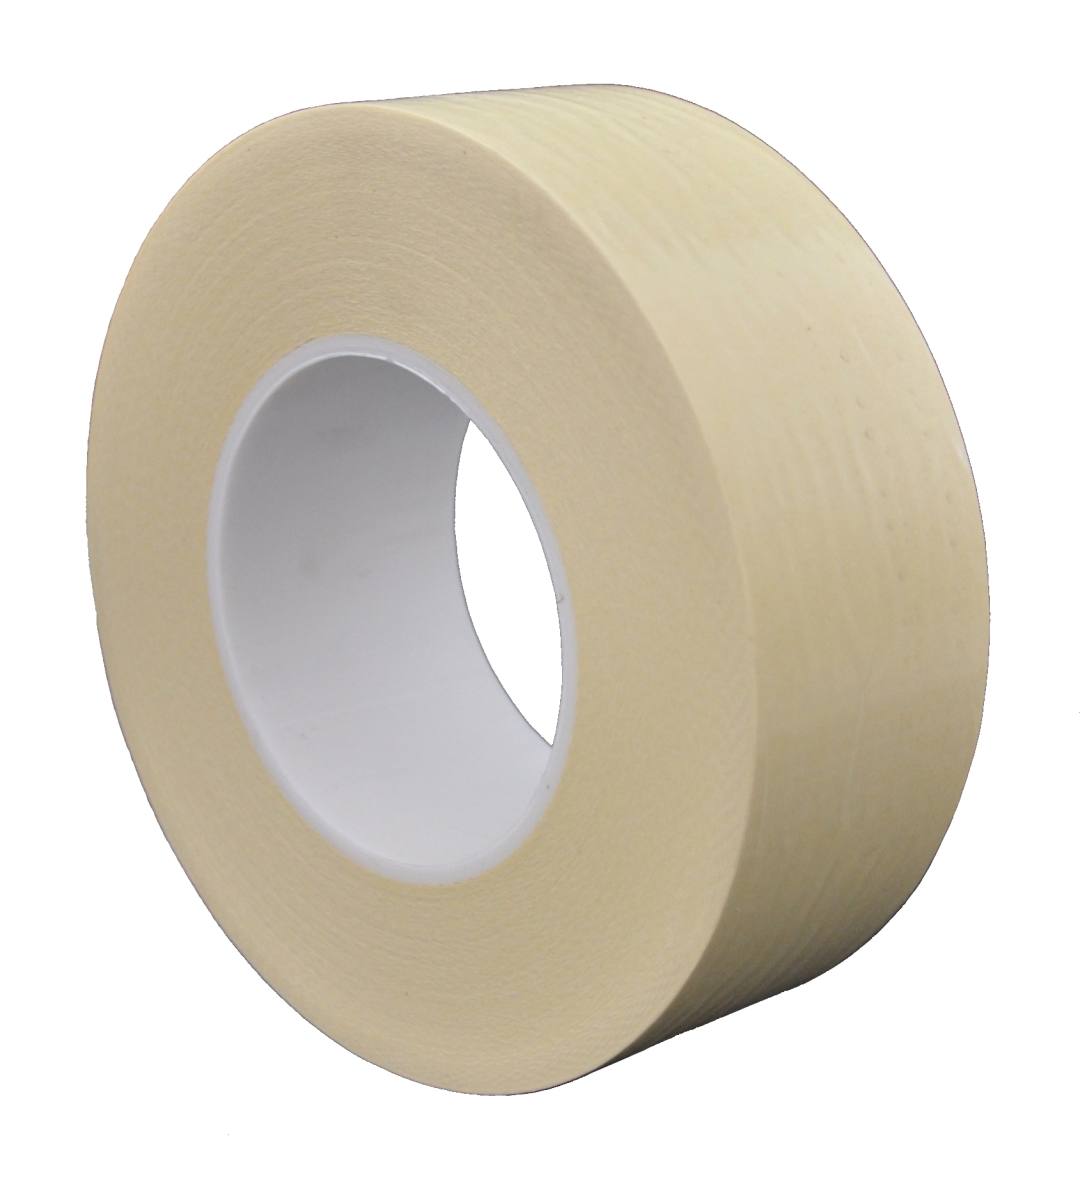 S-K-S 477 Double-sided adhesive tape with fabric backing and synthetic rubber adhesive, 6 mm x 50 m